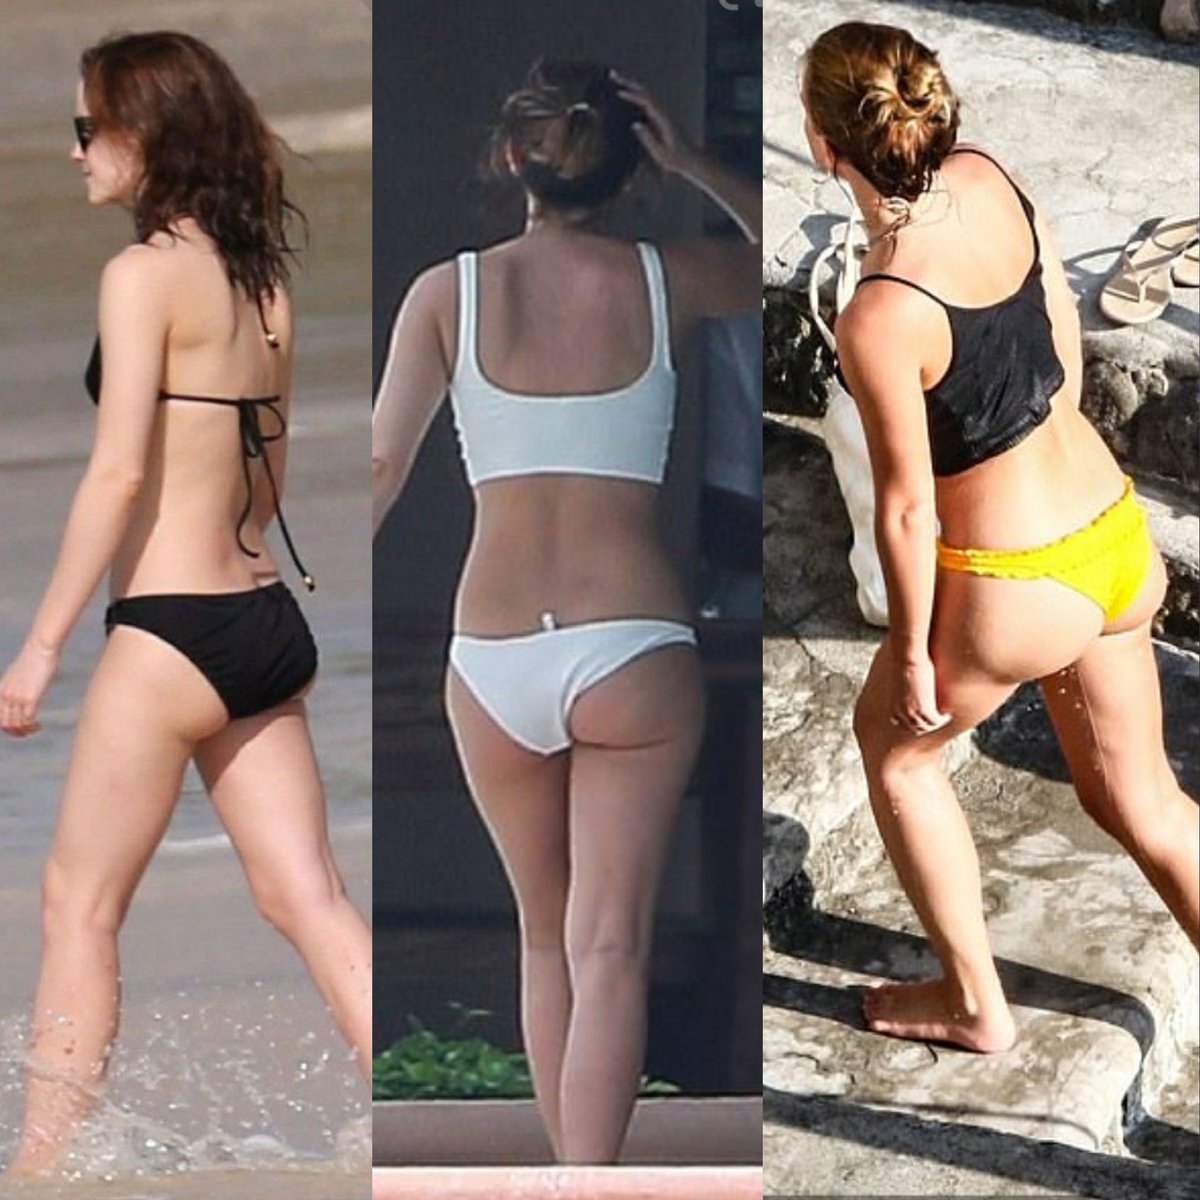 Emma Watson ass evolution. hotter now than it’s ever been.pic.twitter.com/y...